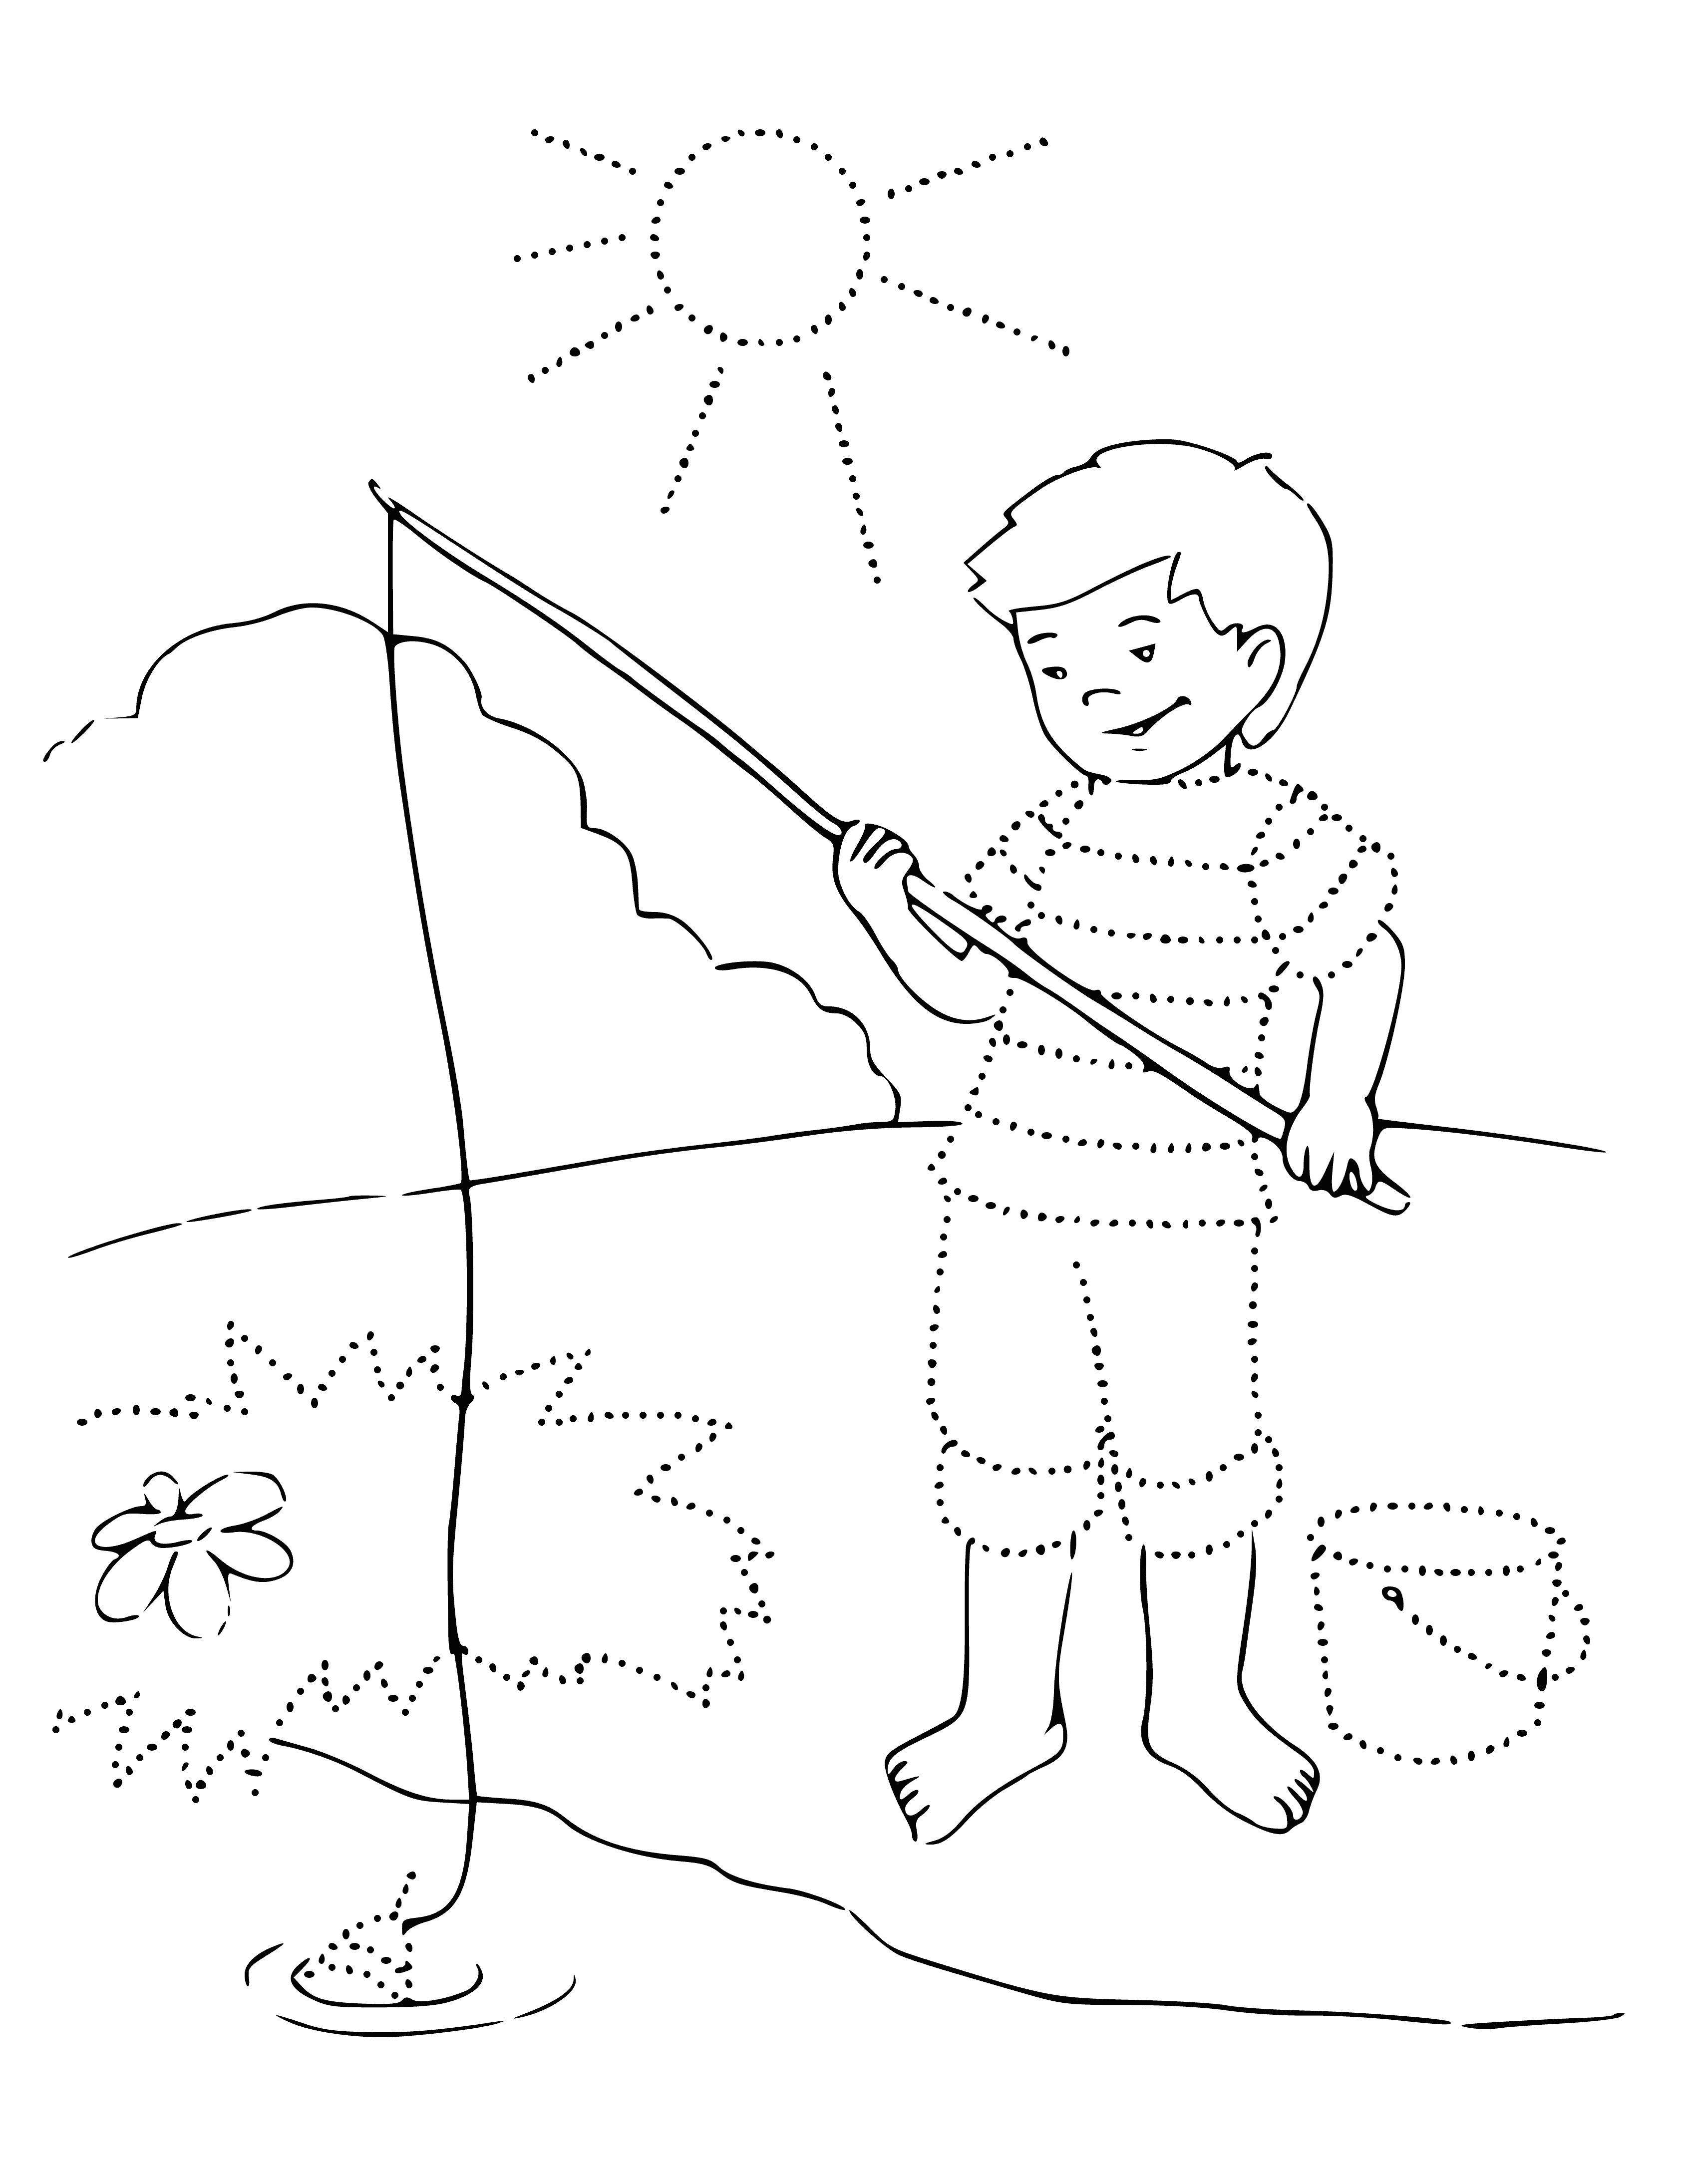 coloring page: Girl & boy fishing on pier under blue sky, white clouds. Coloring page is great for summer fun. #summercoloringpages